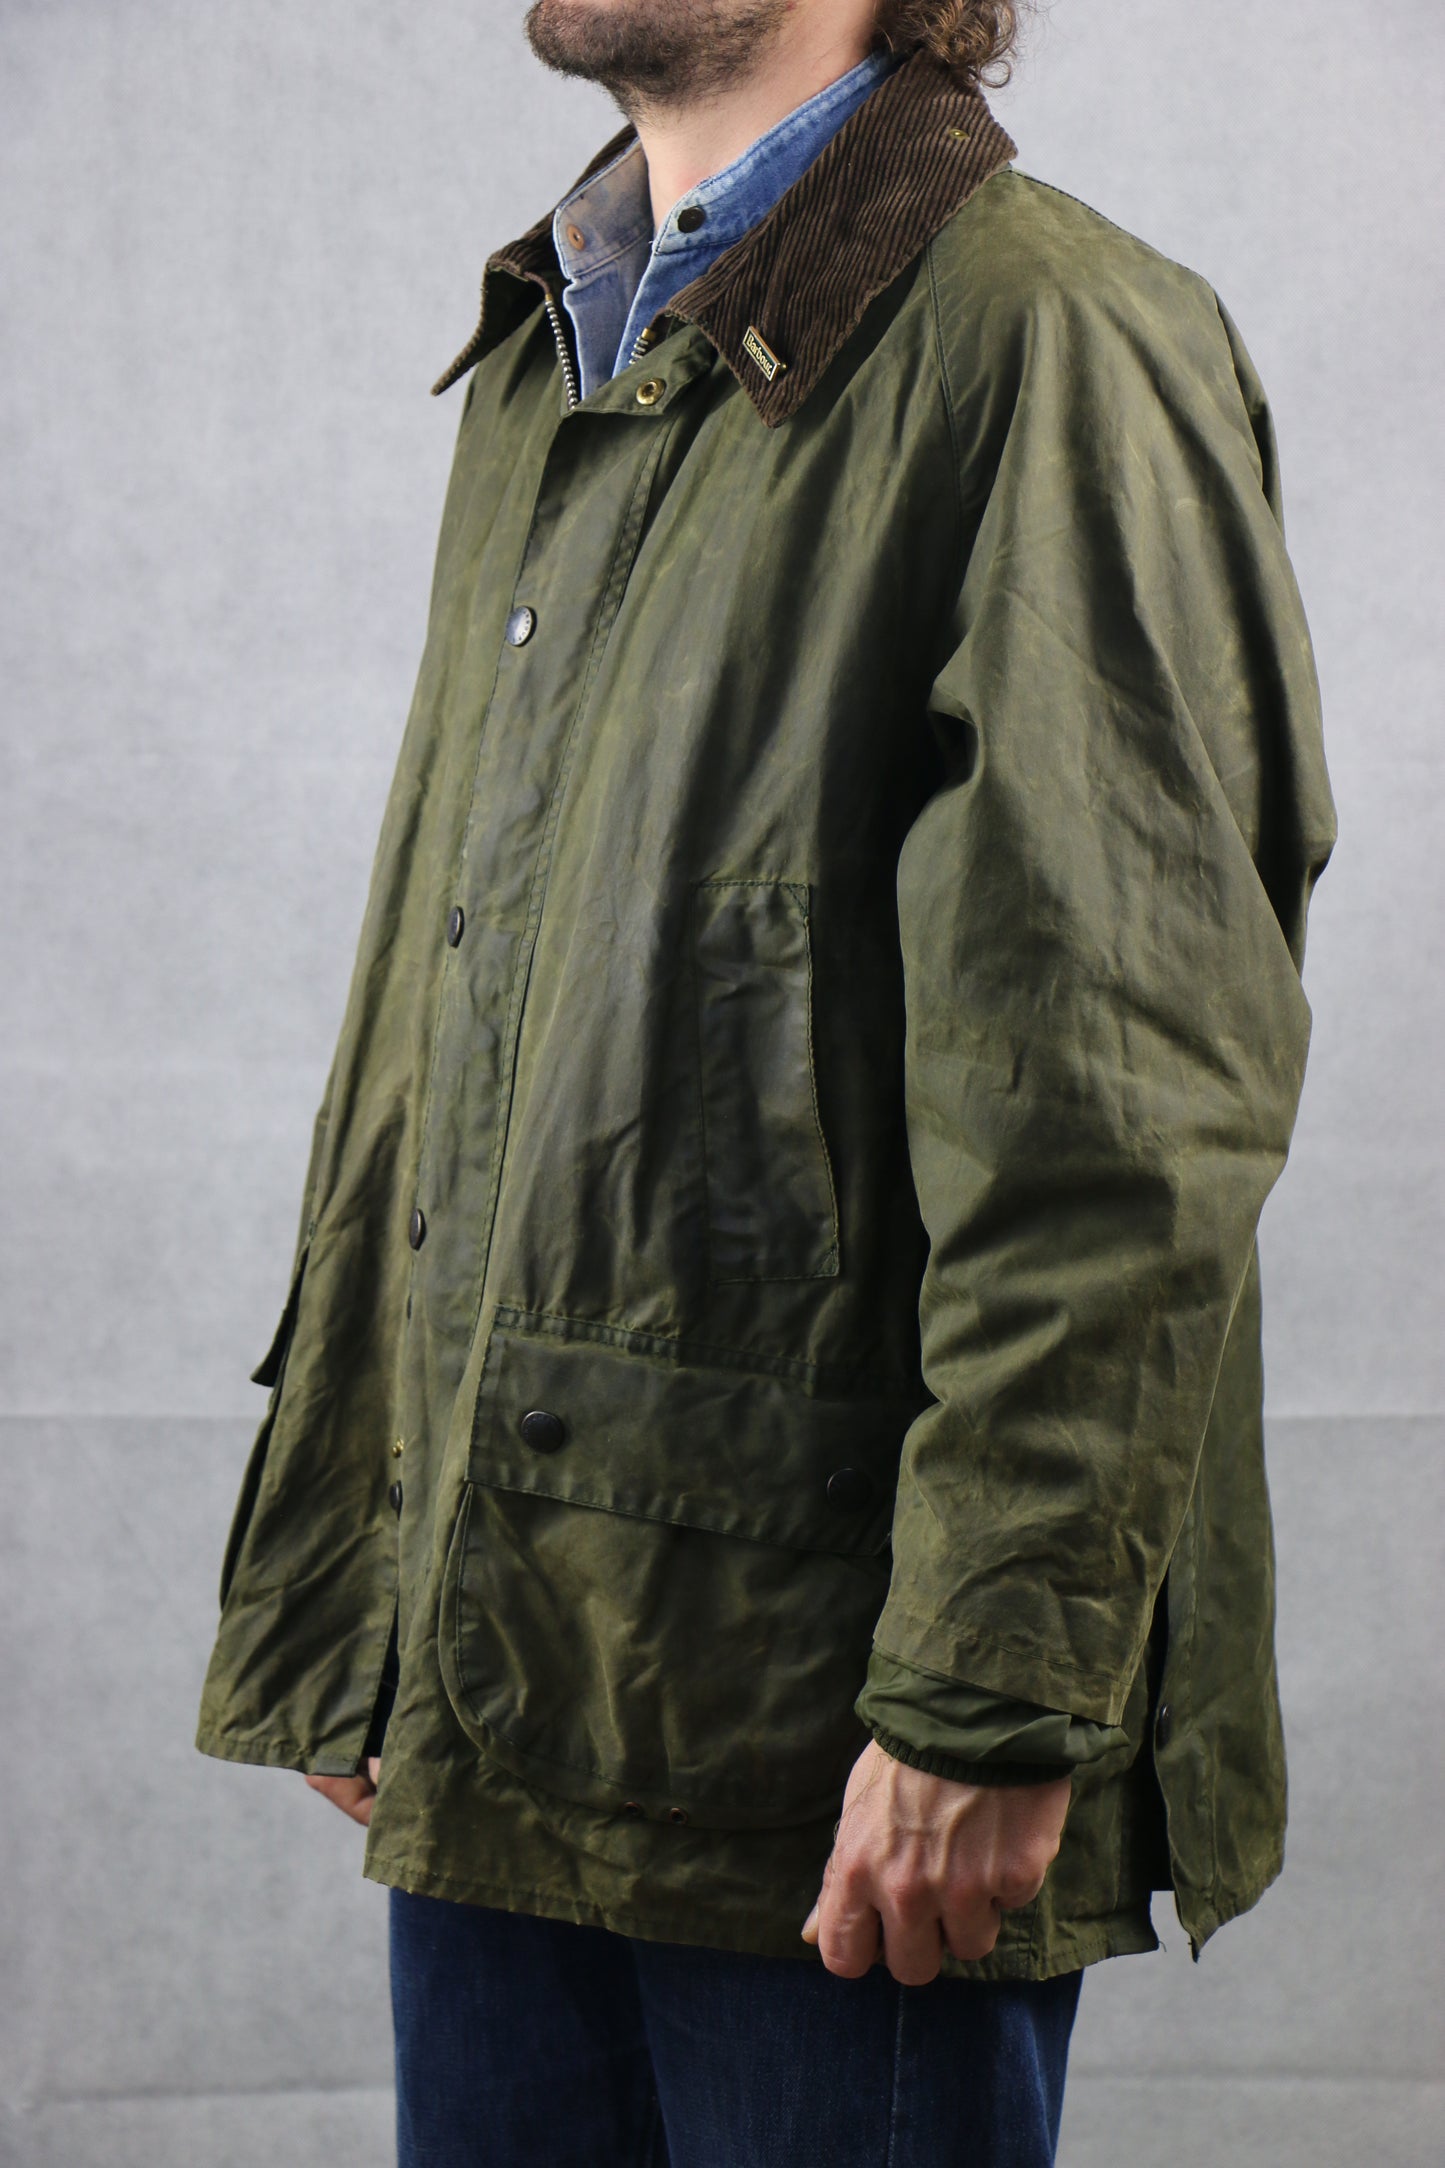 Barbour 'Bedale' C46 Wax Jacket Military Green - vintage clothing clochard92.com